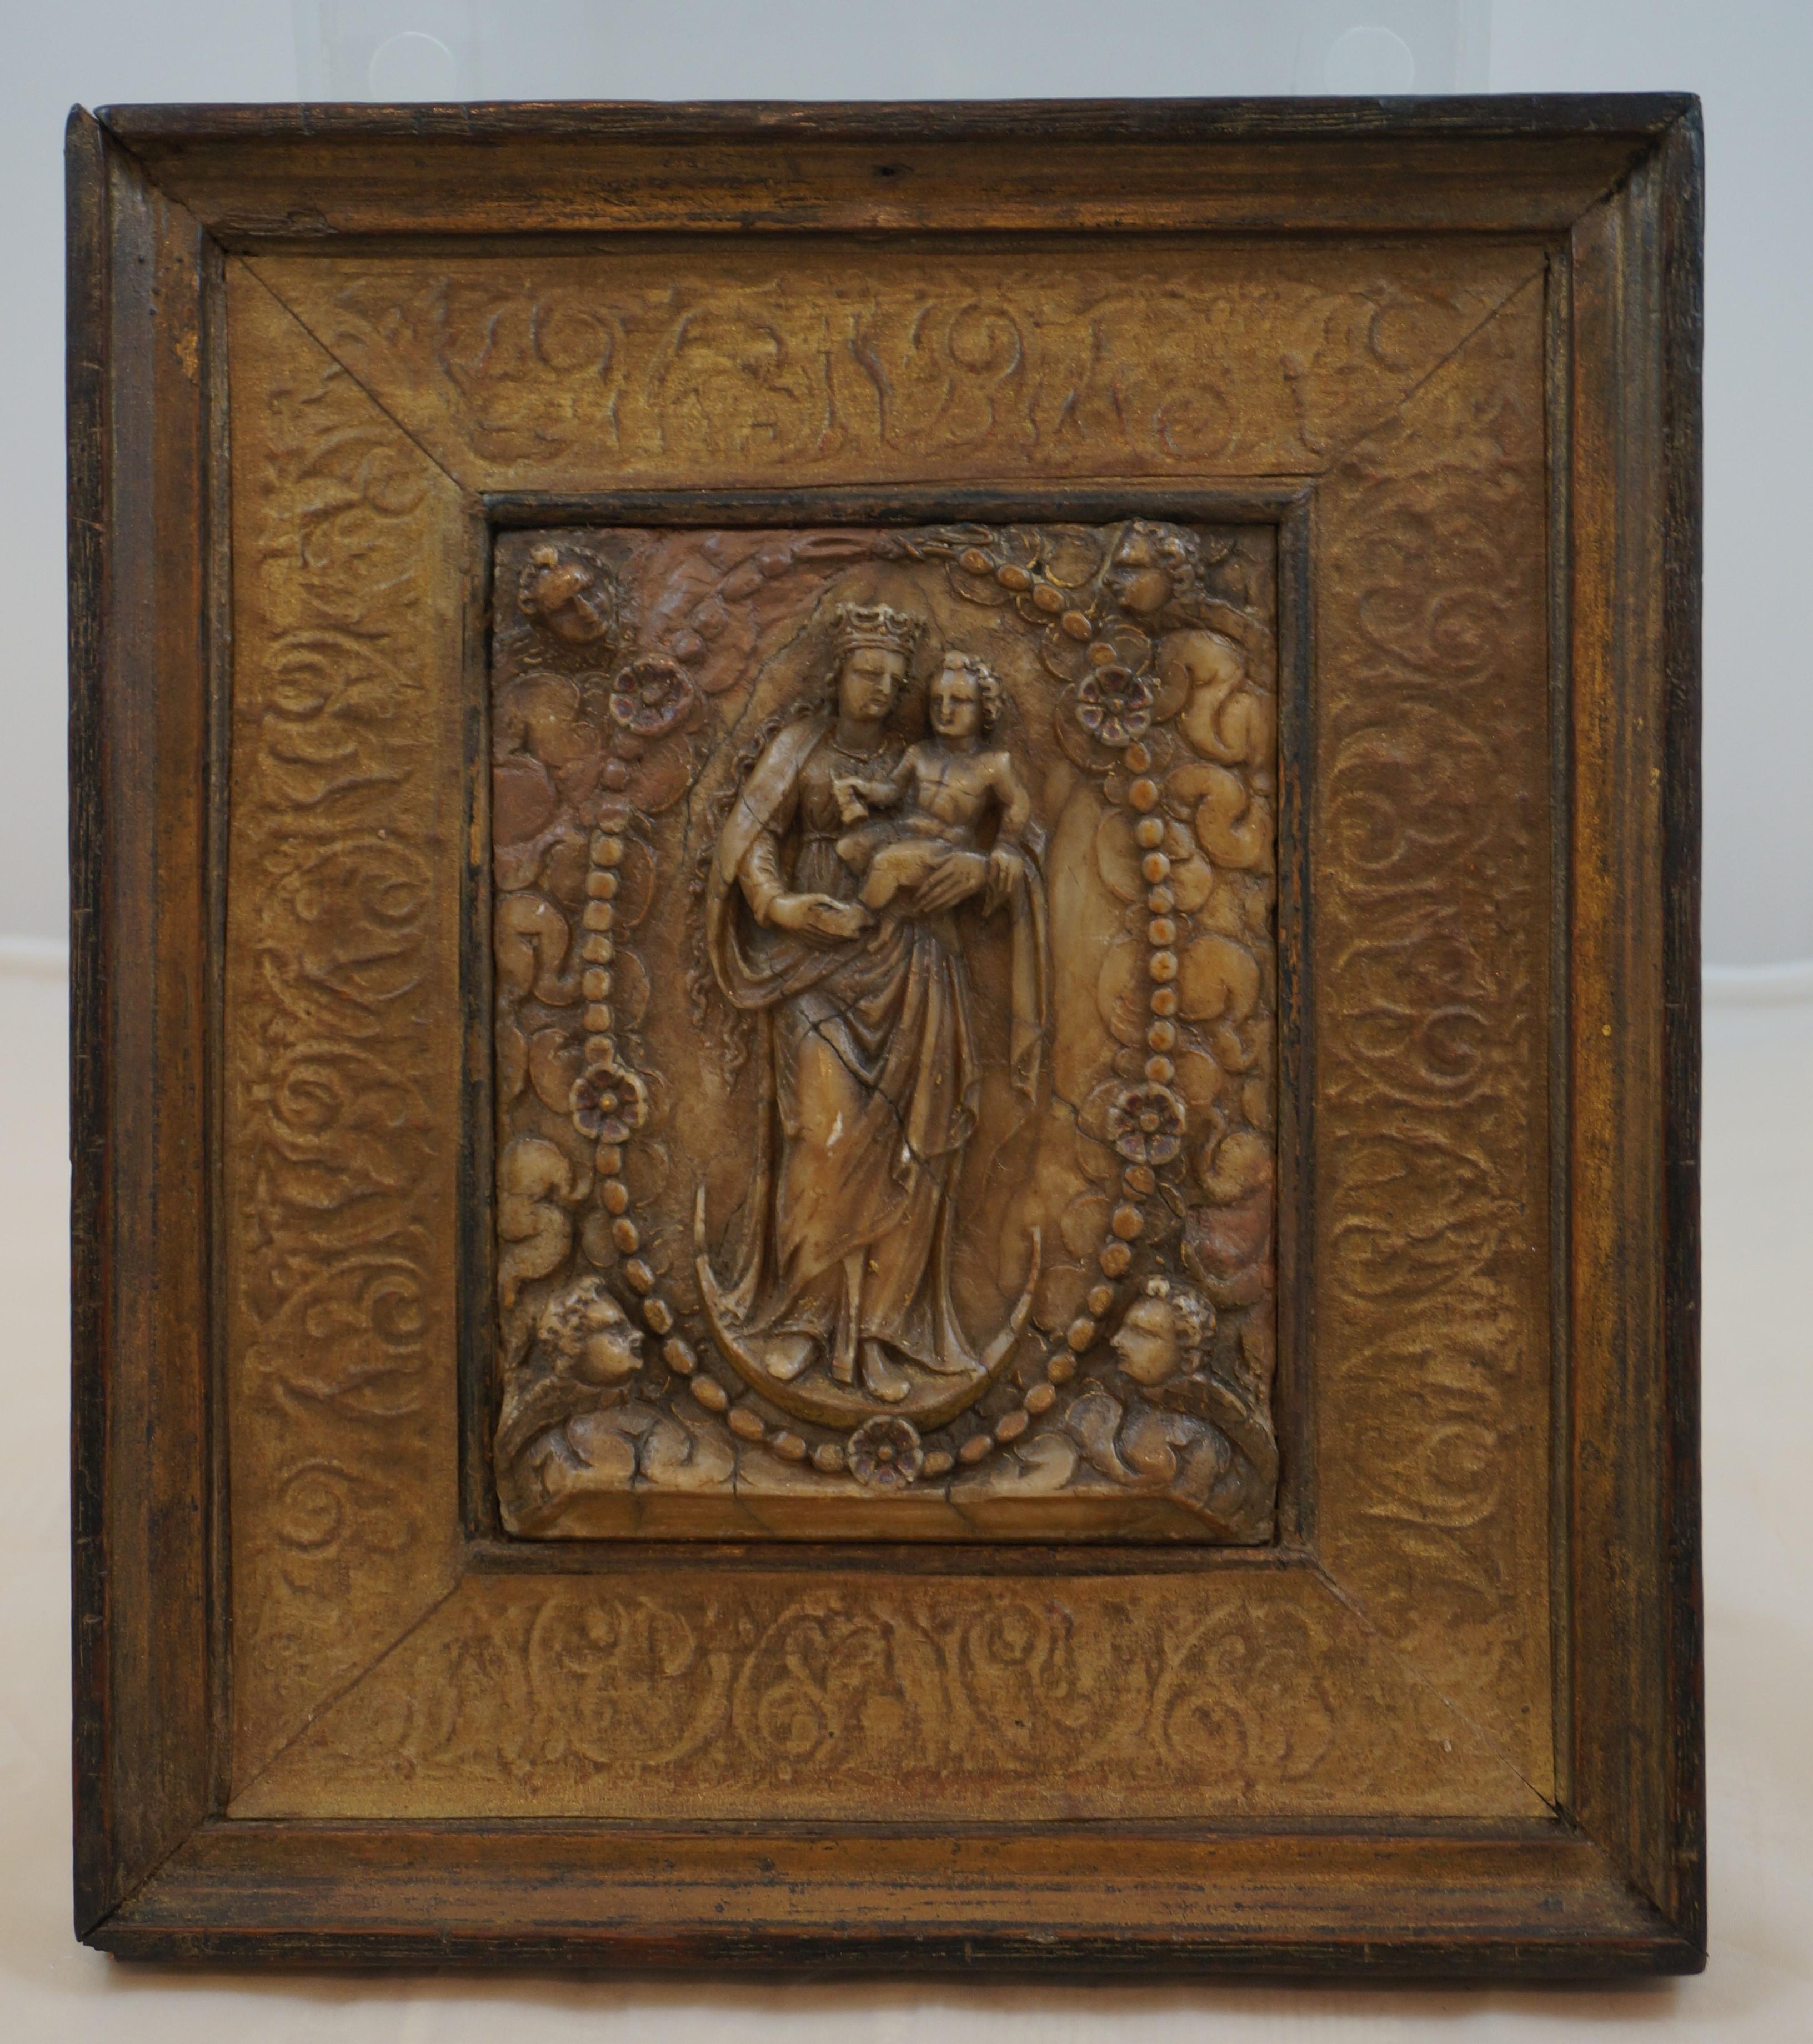 Alabaster Plaque depicting Saint Mary with a crown and standing on a crescent moon holding the infant Jesus and surrounded by a Rosary with 5 roses and 4 Cherubs (angels) and clouds.

This plaque is made in Mechelen (Malines) a central Belgian city